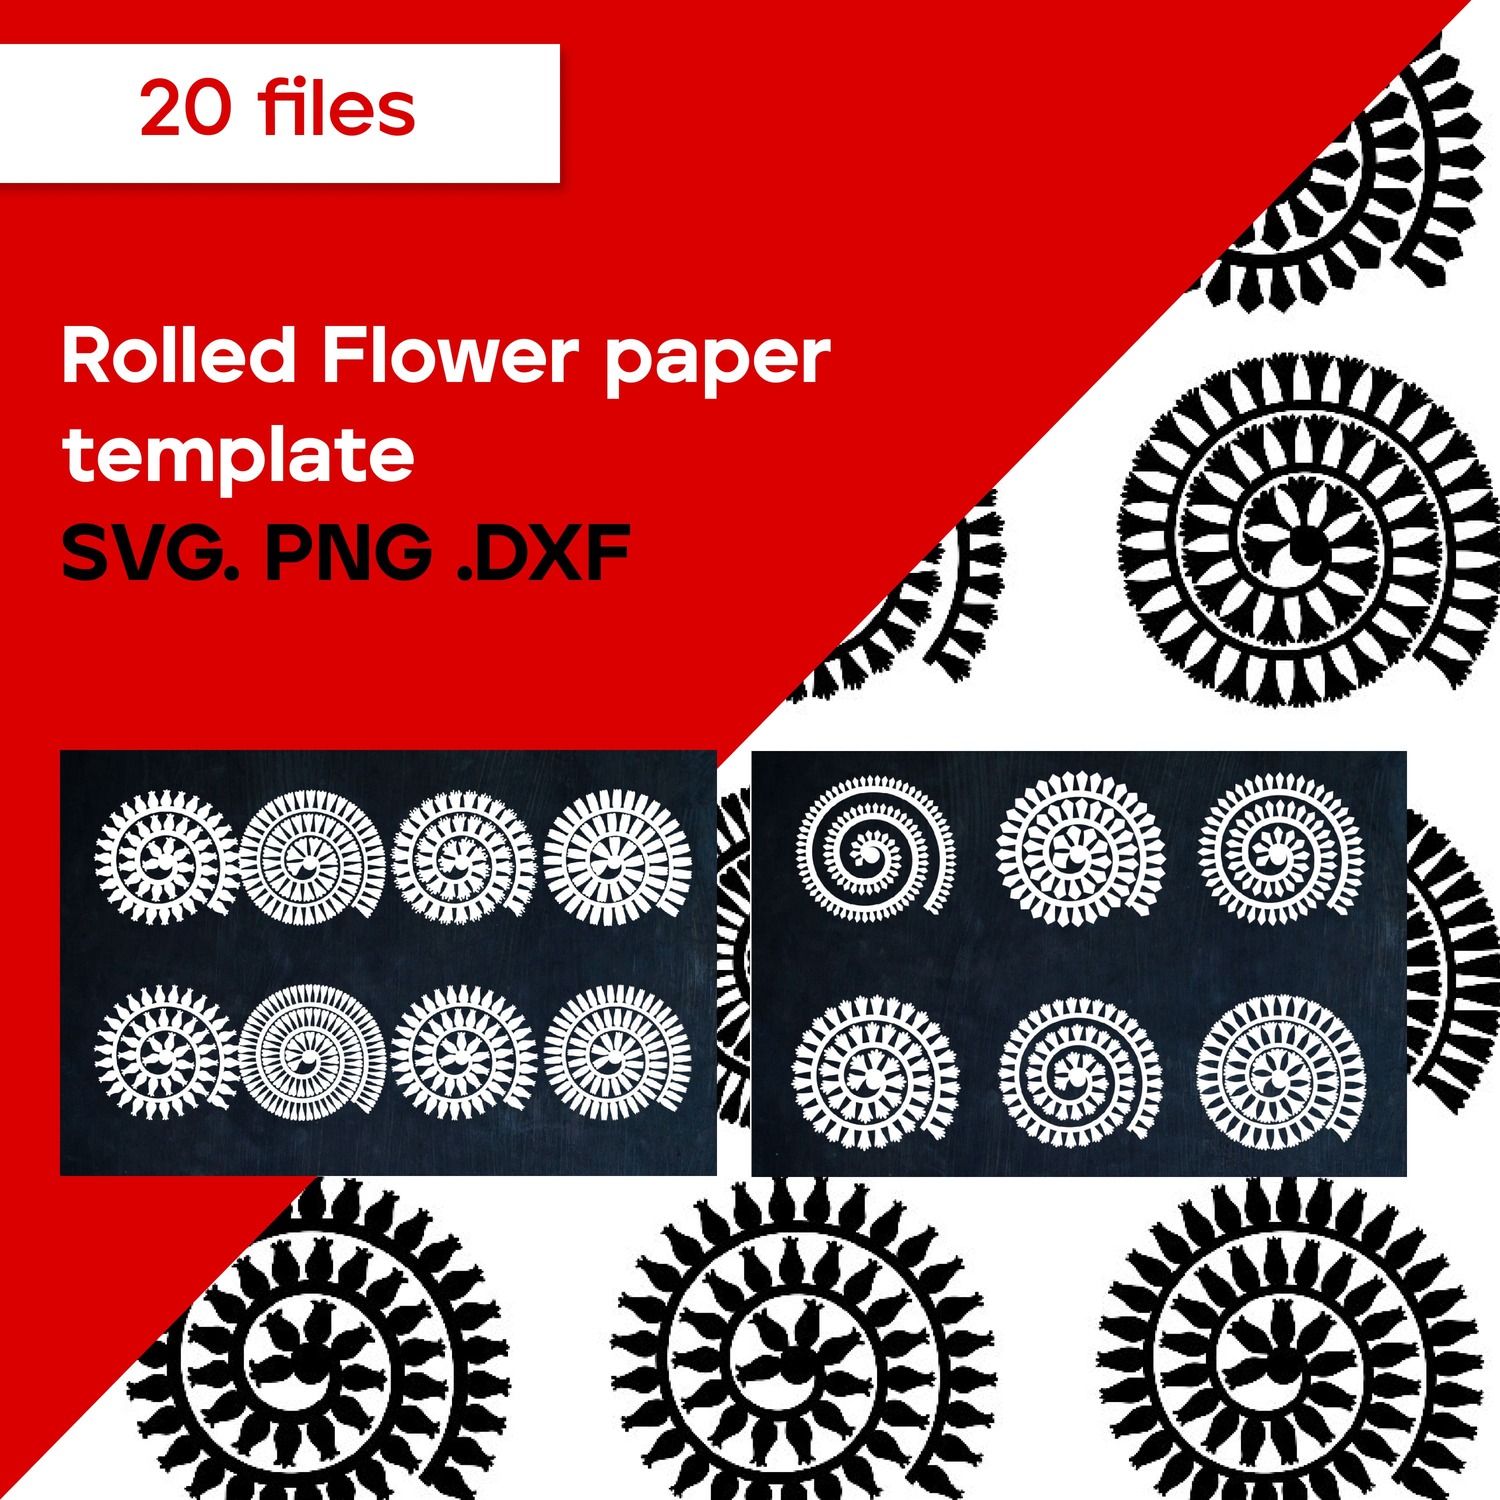 Rolled Flower paper template SVG. cover image.